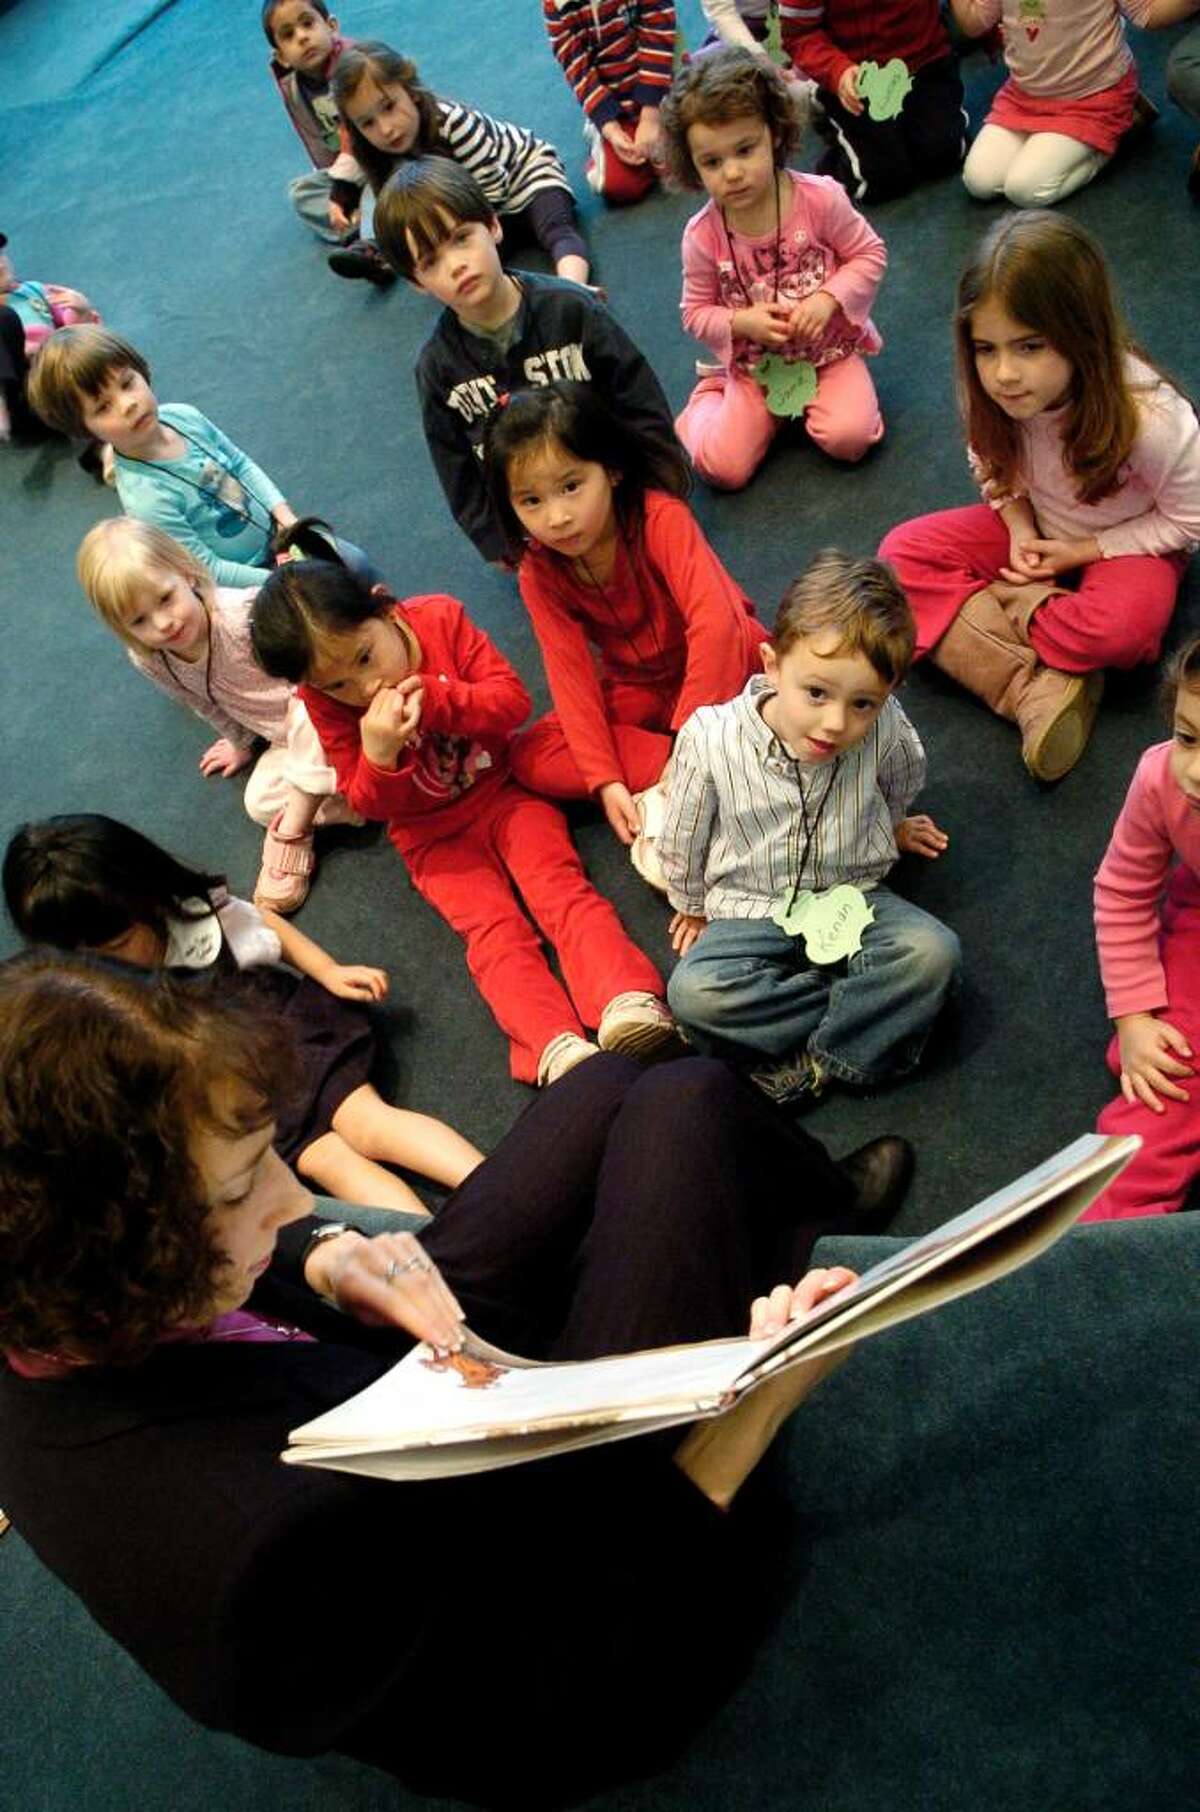 Children's librarian Amy Lolien-Harper reads to preschoolers during story hour at the Harry Bennett branch of the Ferguson Library in Stamford, Conn. on Monday March 22, 2010.